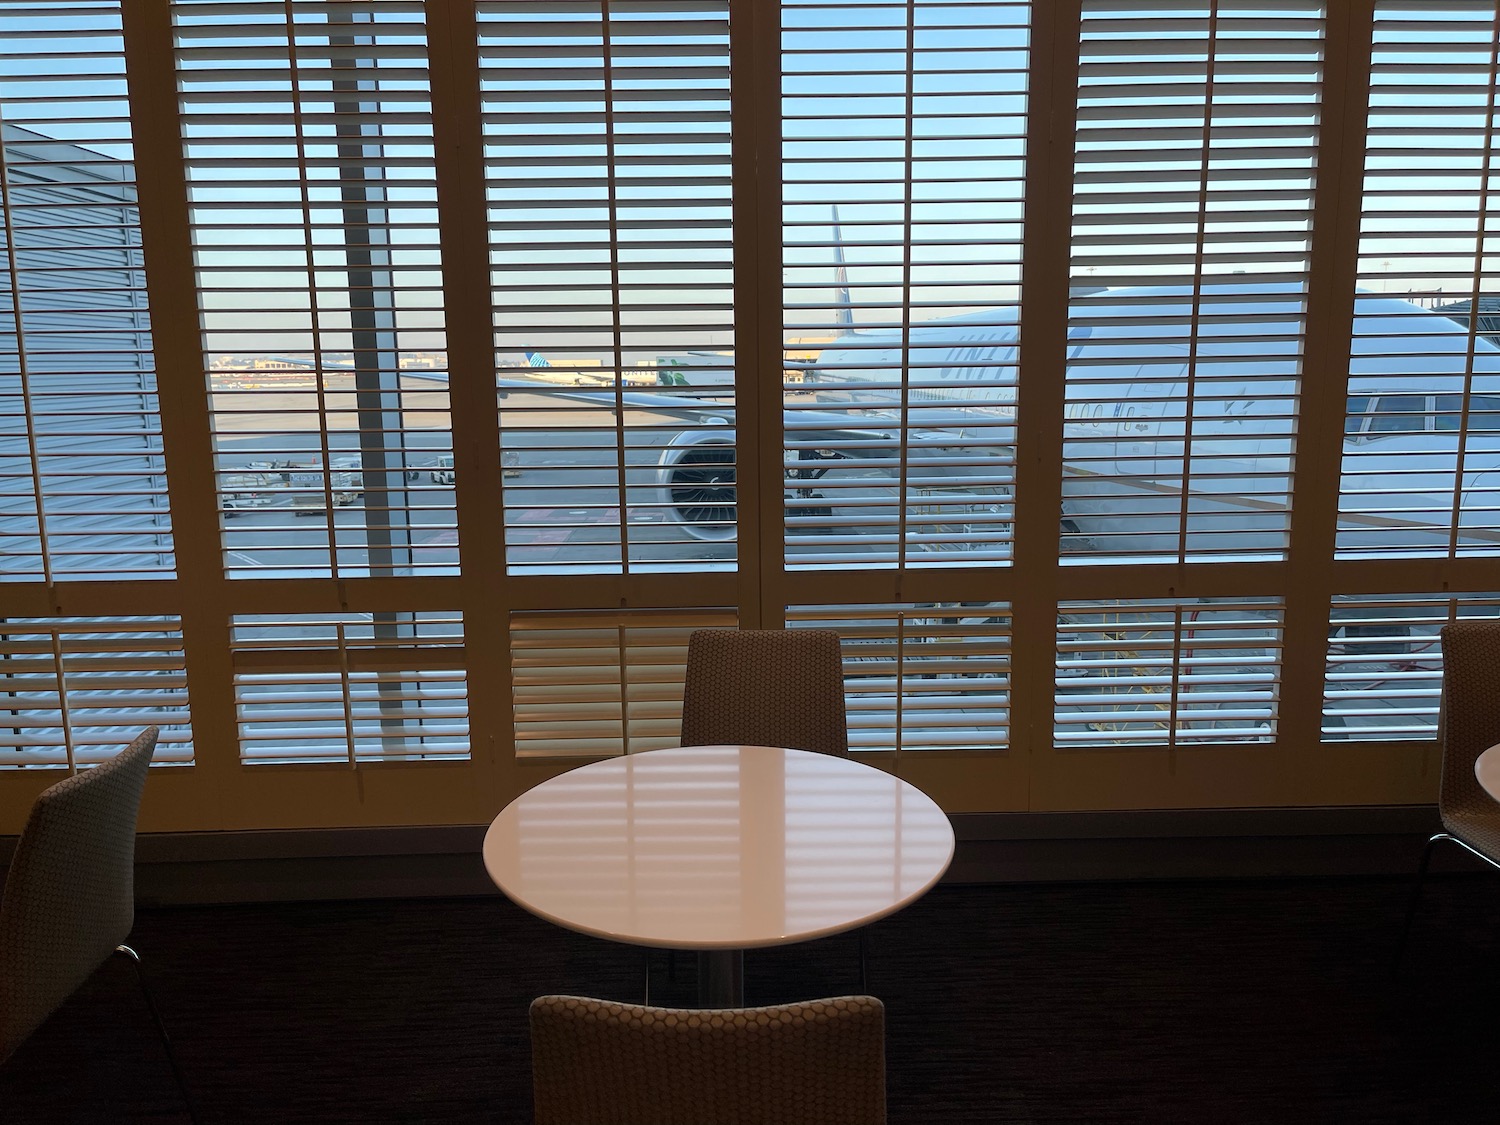 a table and chairs in front of a window with blinds